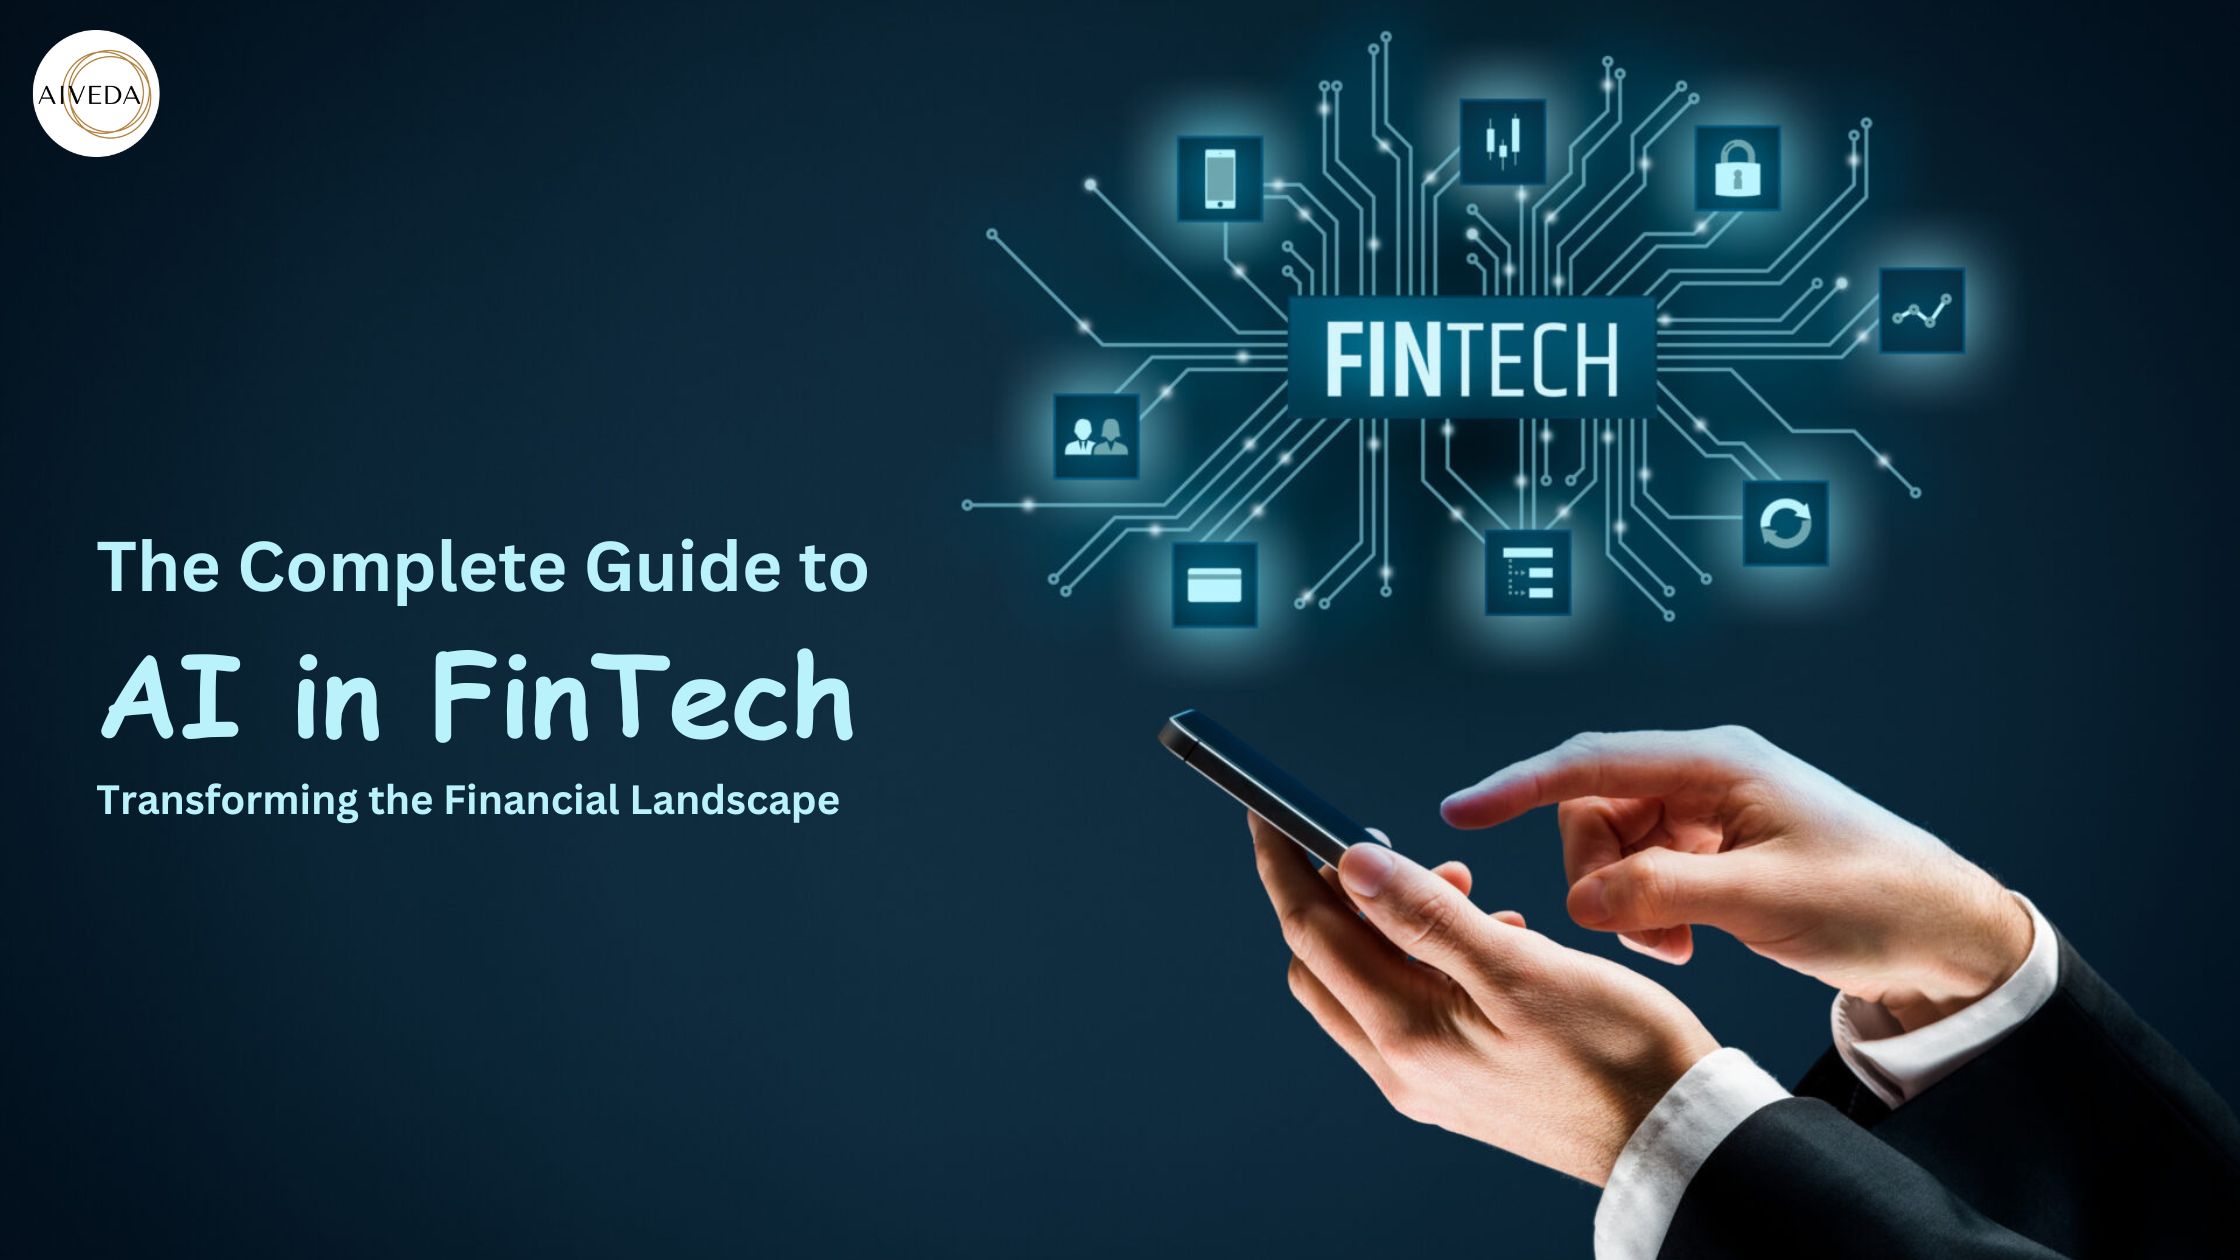 The Complete Guide to AI in FinTech: Transforming the Financial Landscape